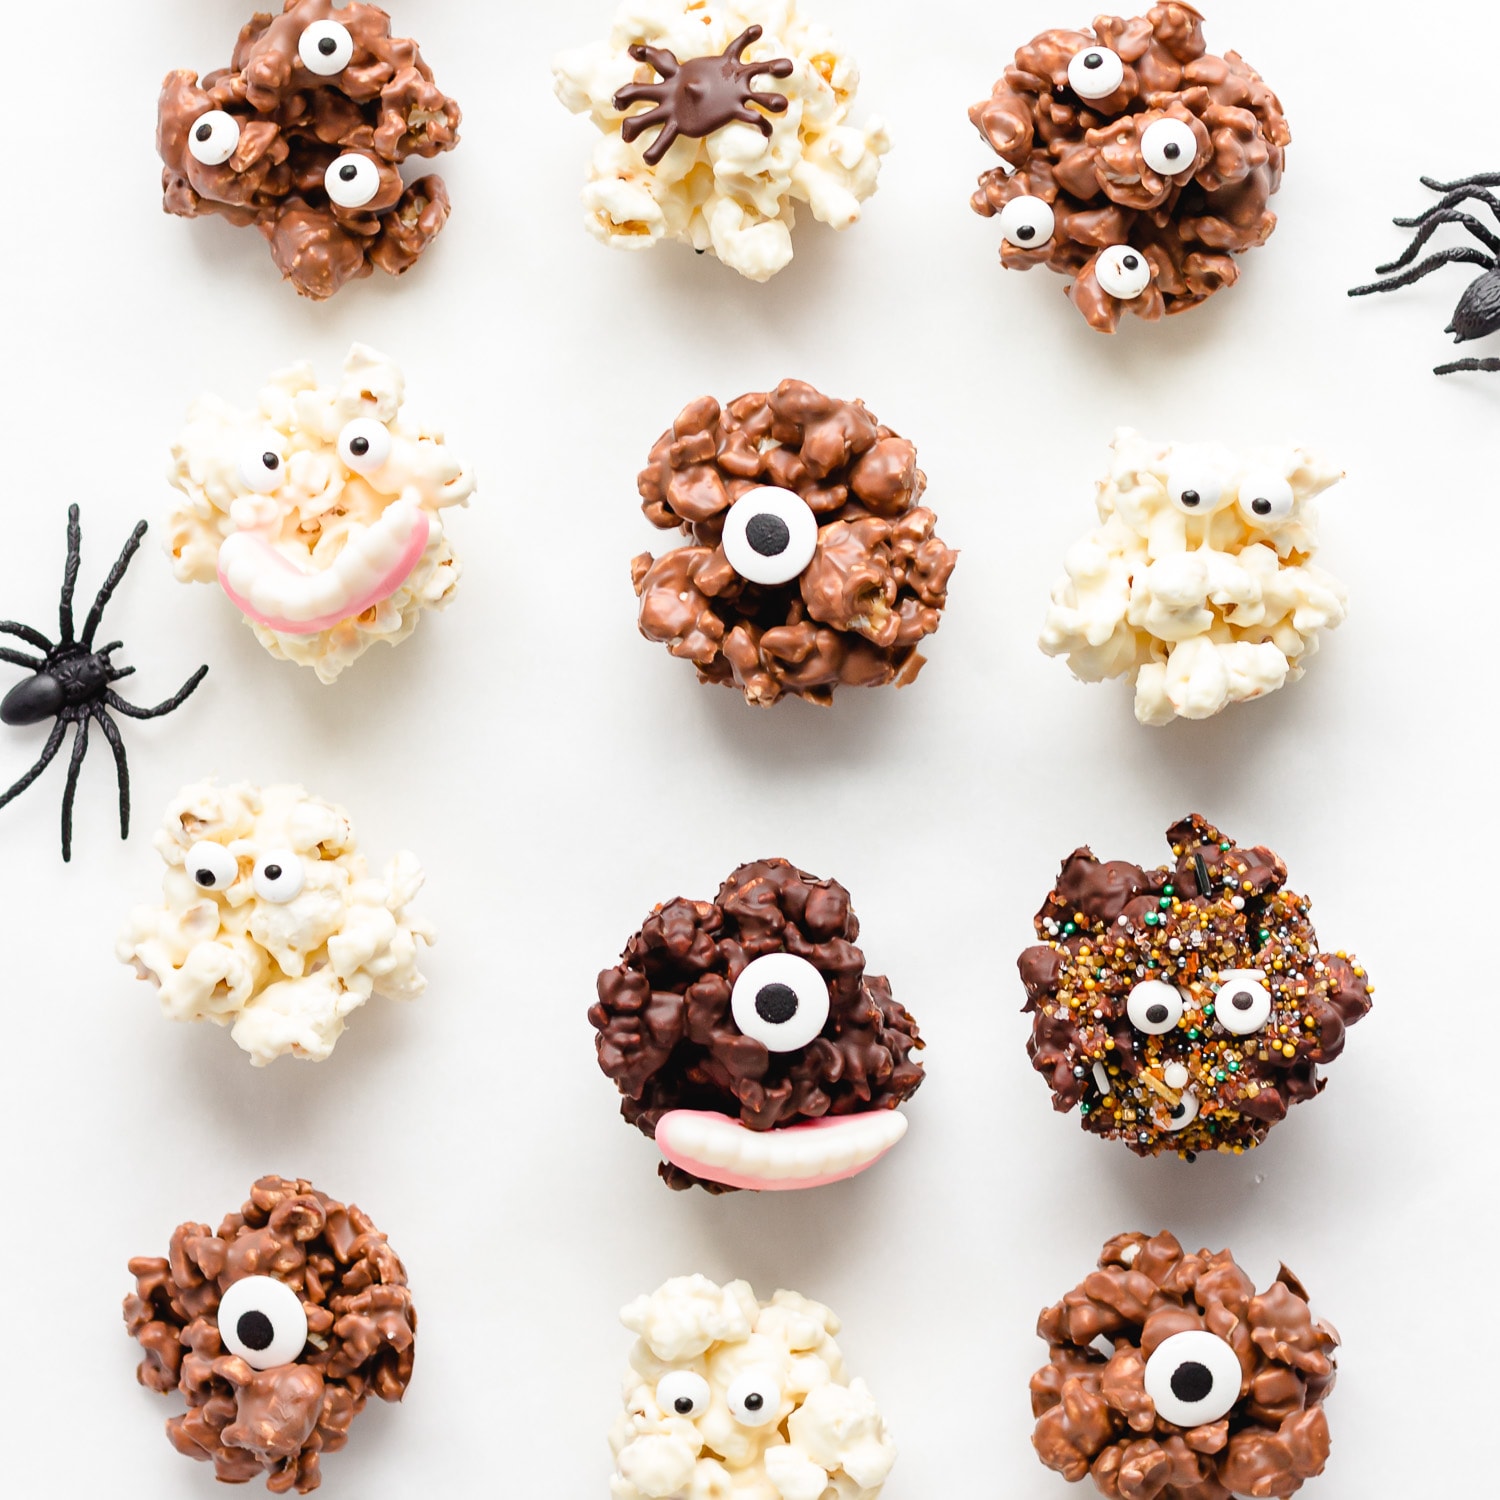 A variety of different chocolate popcorn balls decorated for Halloween.